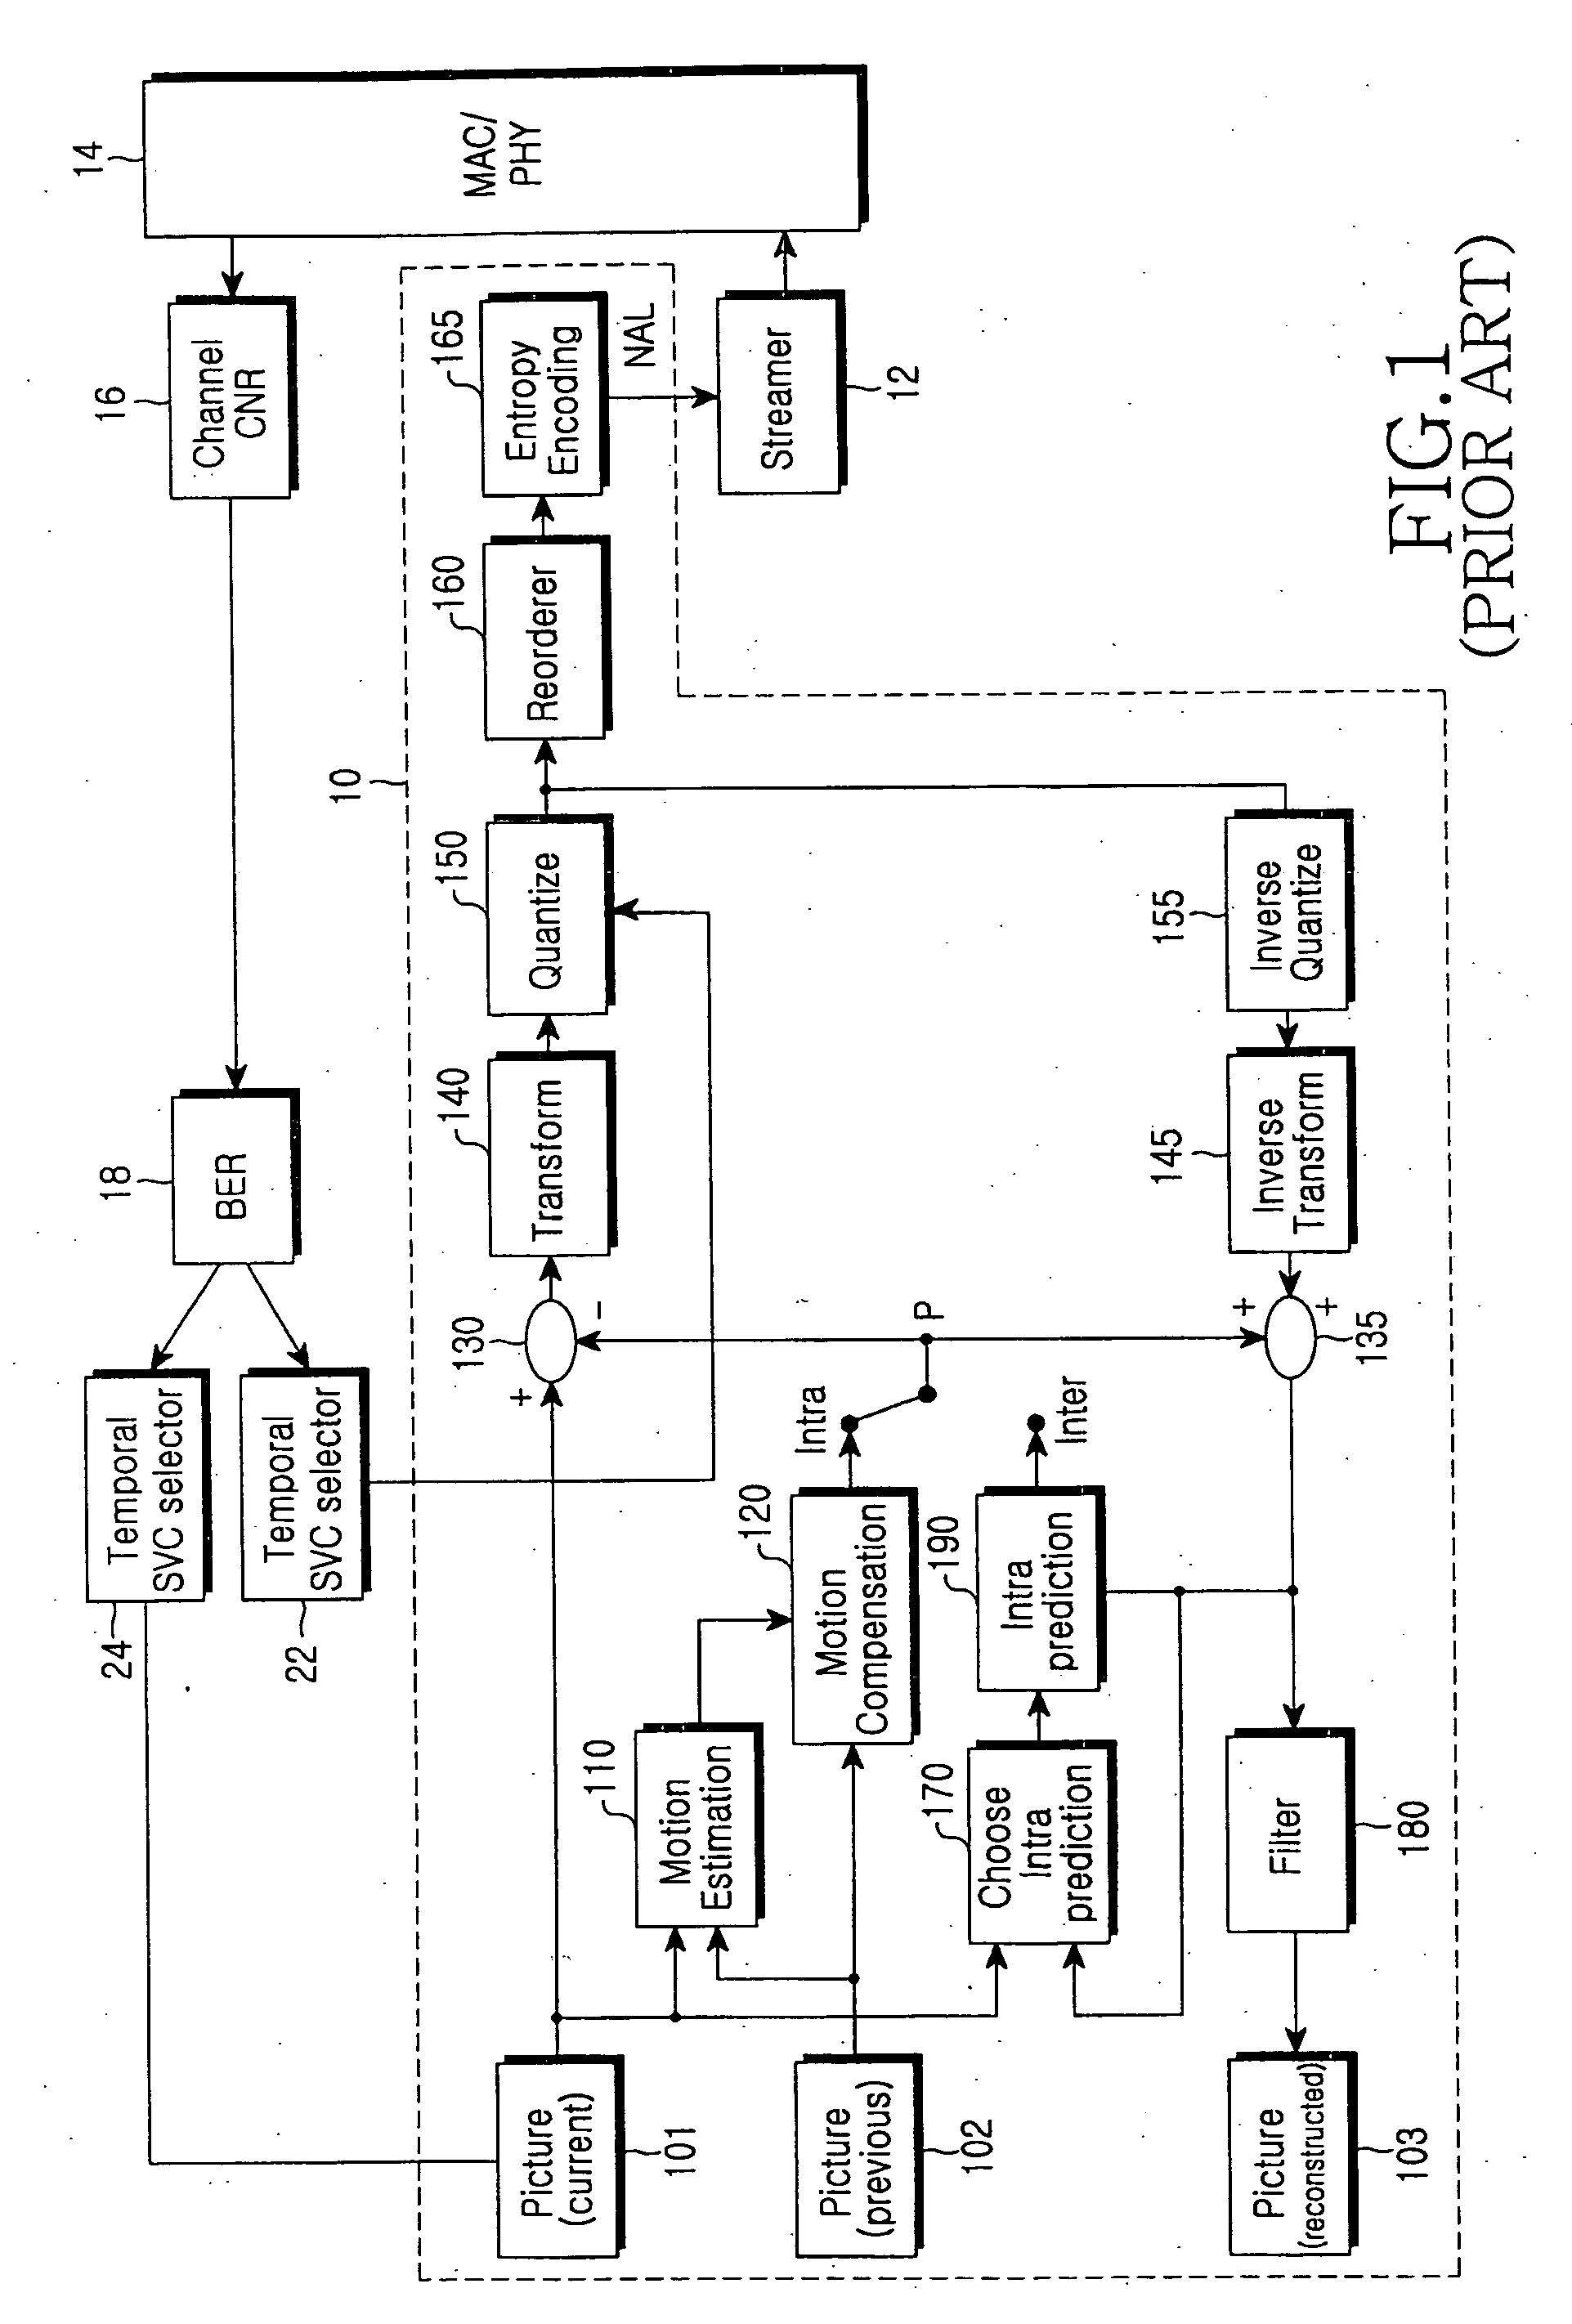 Apparatus and method for matching compressed video data under wireless fading environment